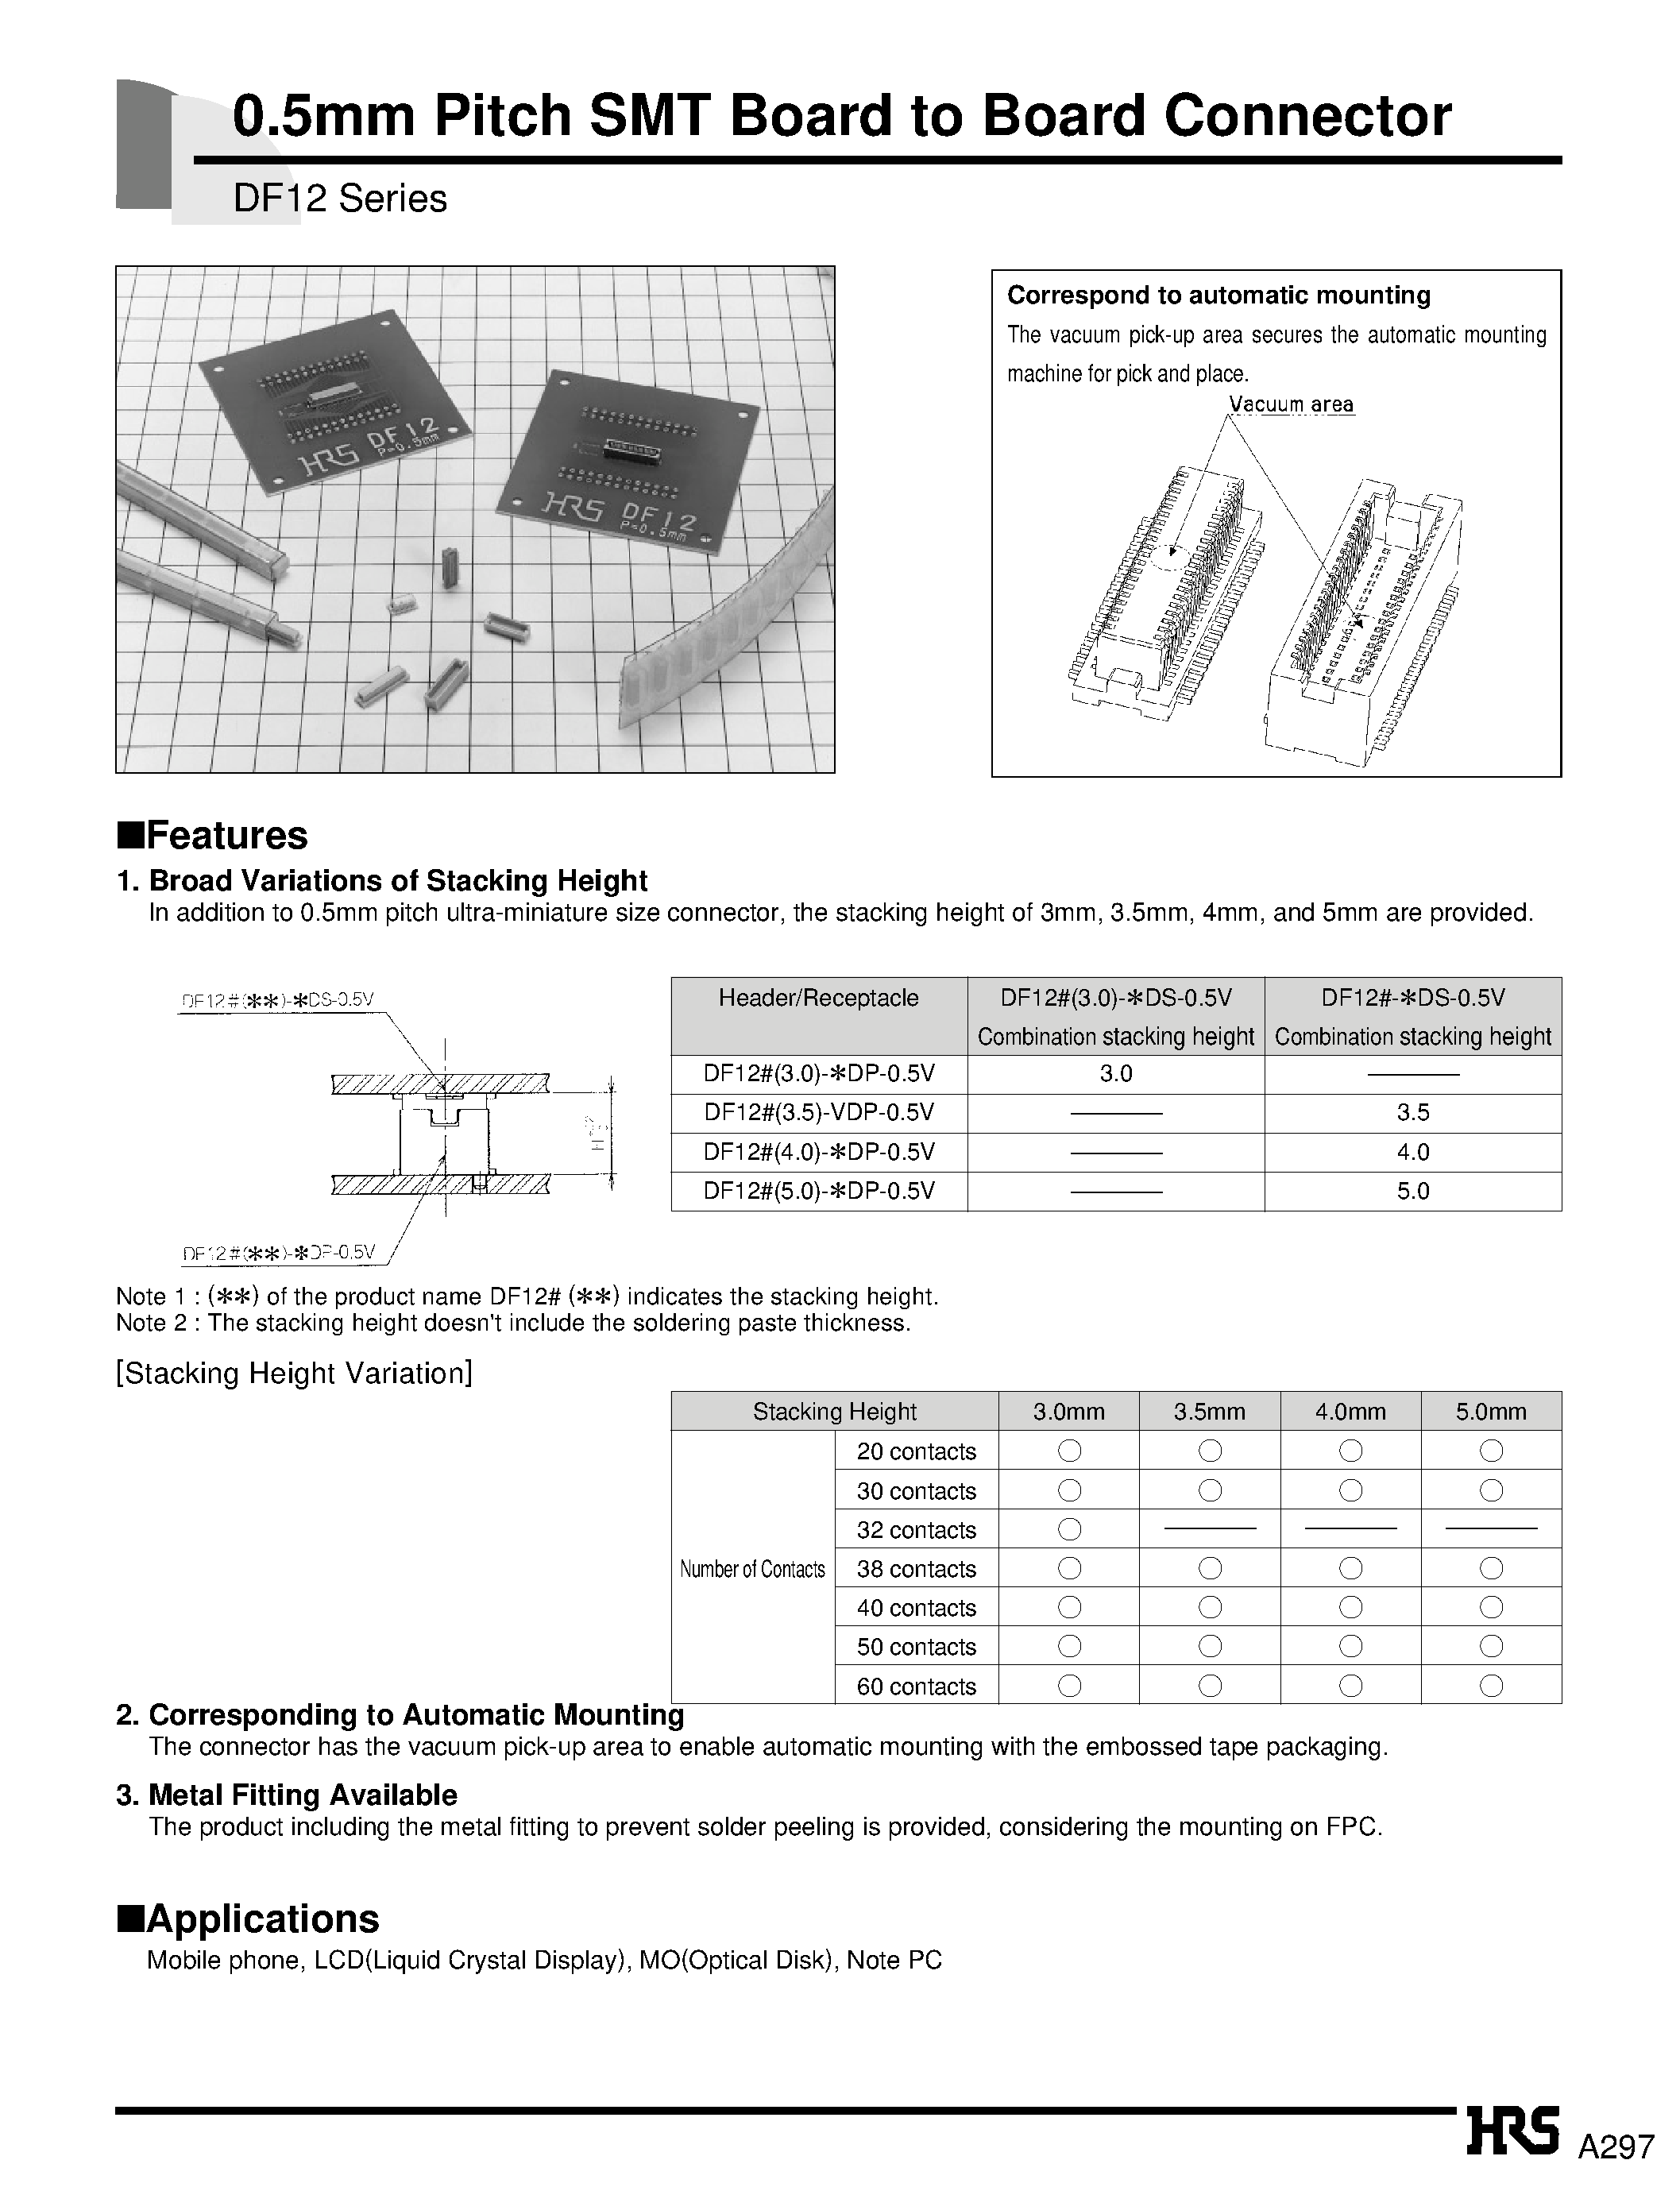 Datasheet DF12-50DP-0.5V - 0.5mm Pitch SMT Board to Board Connector page 1